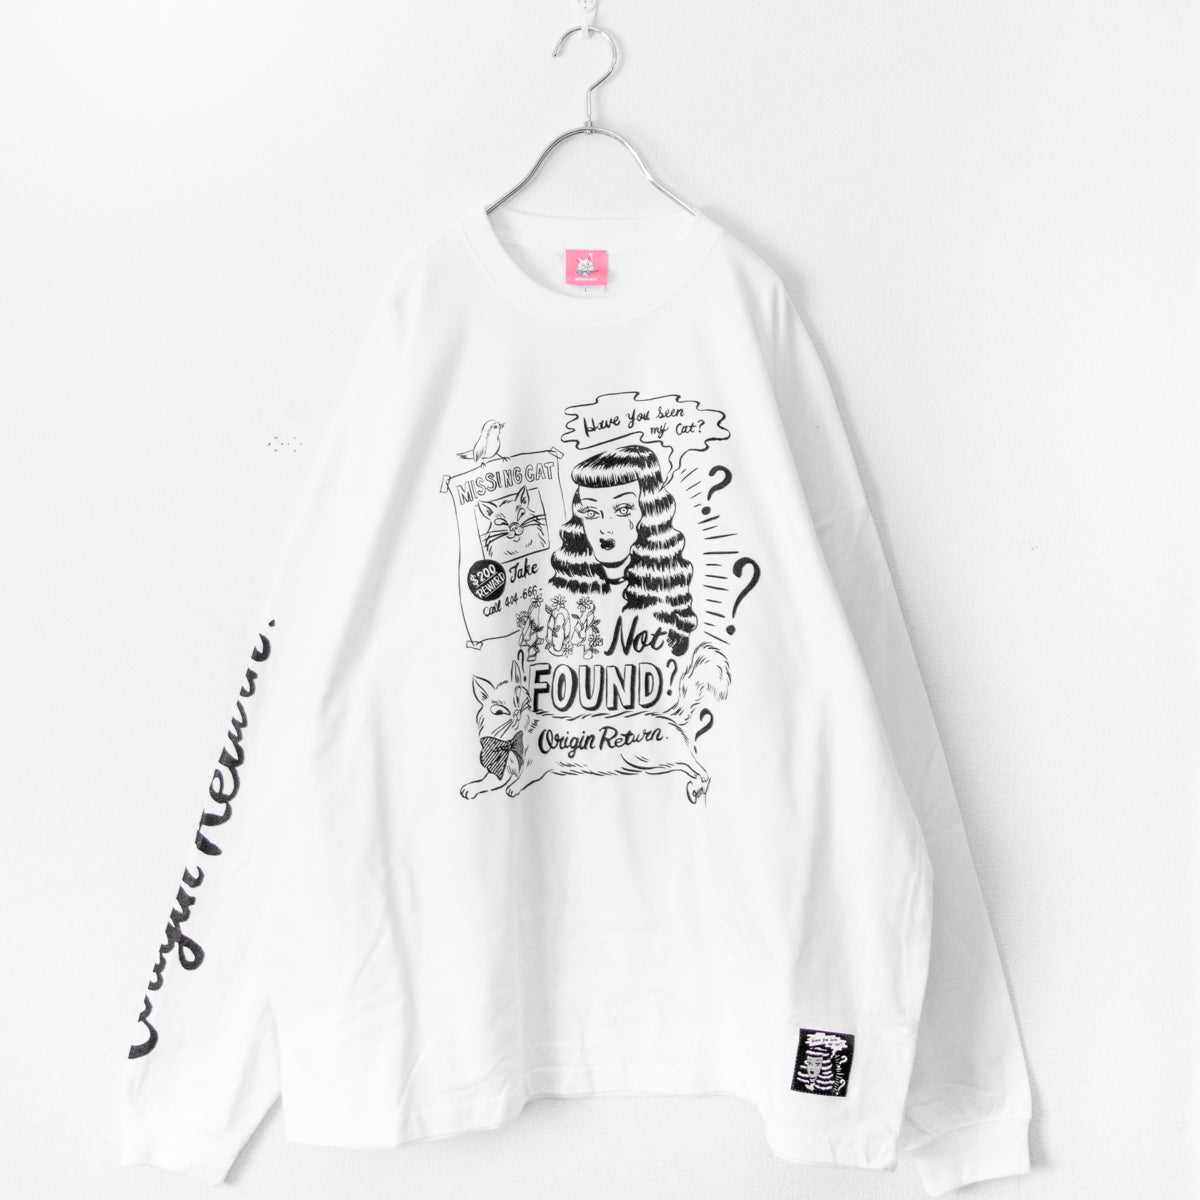 404 NOT FOUND by Gummy Long Sleeve T-shirt